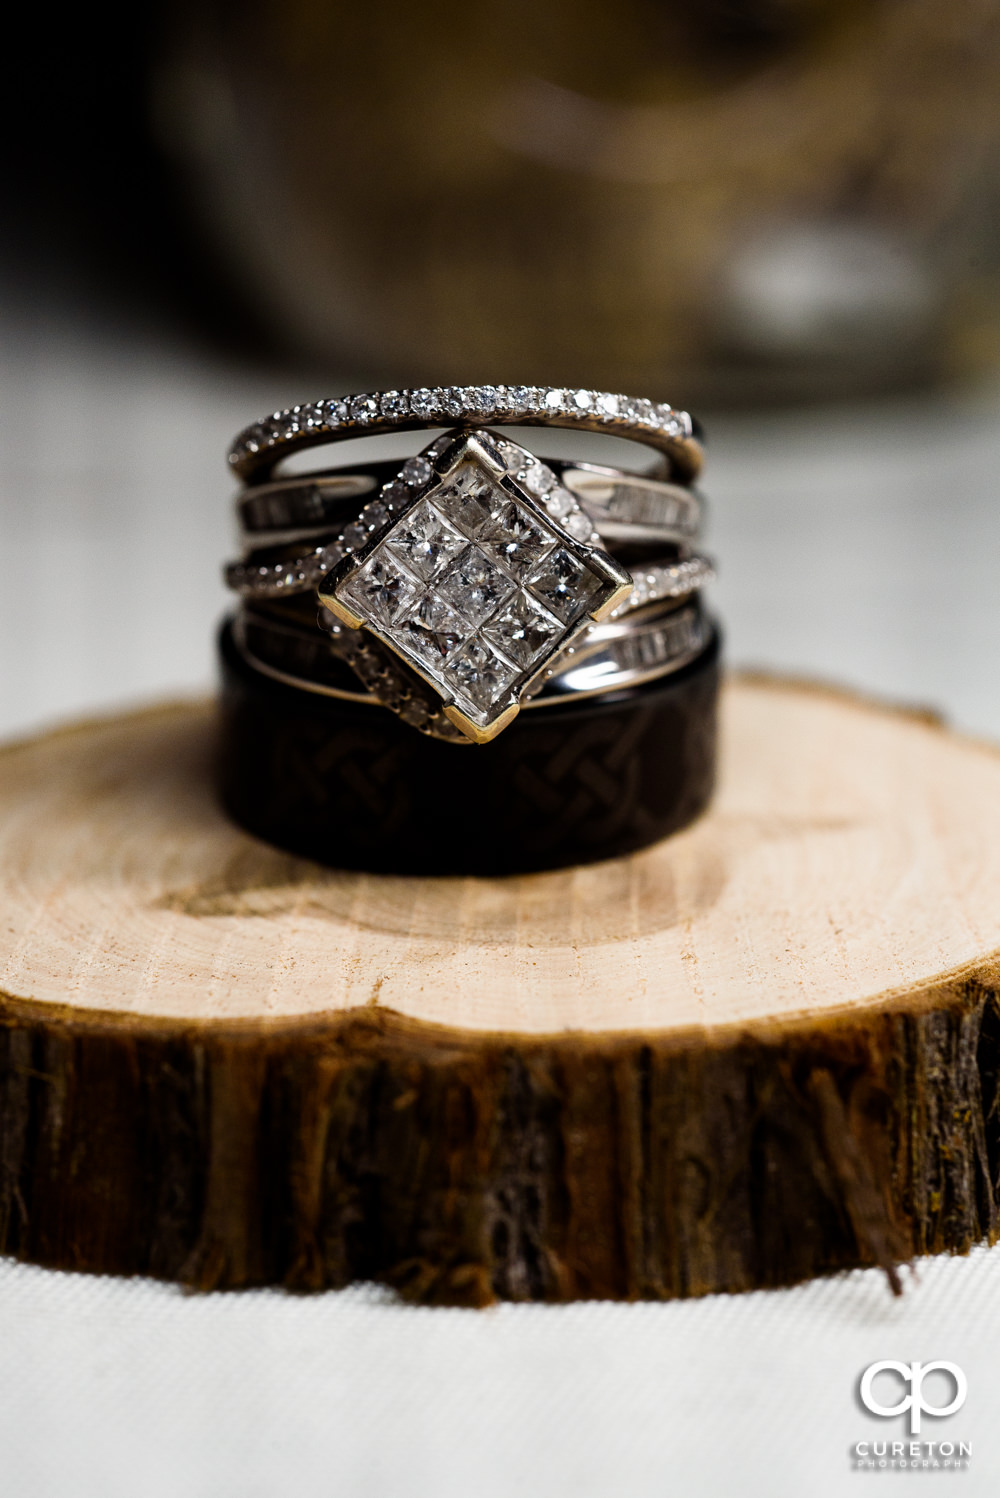 Closeup of wedding ring on a piece of a log.